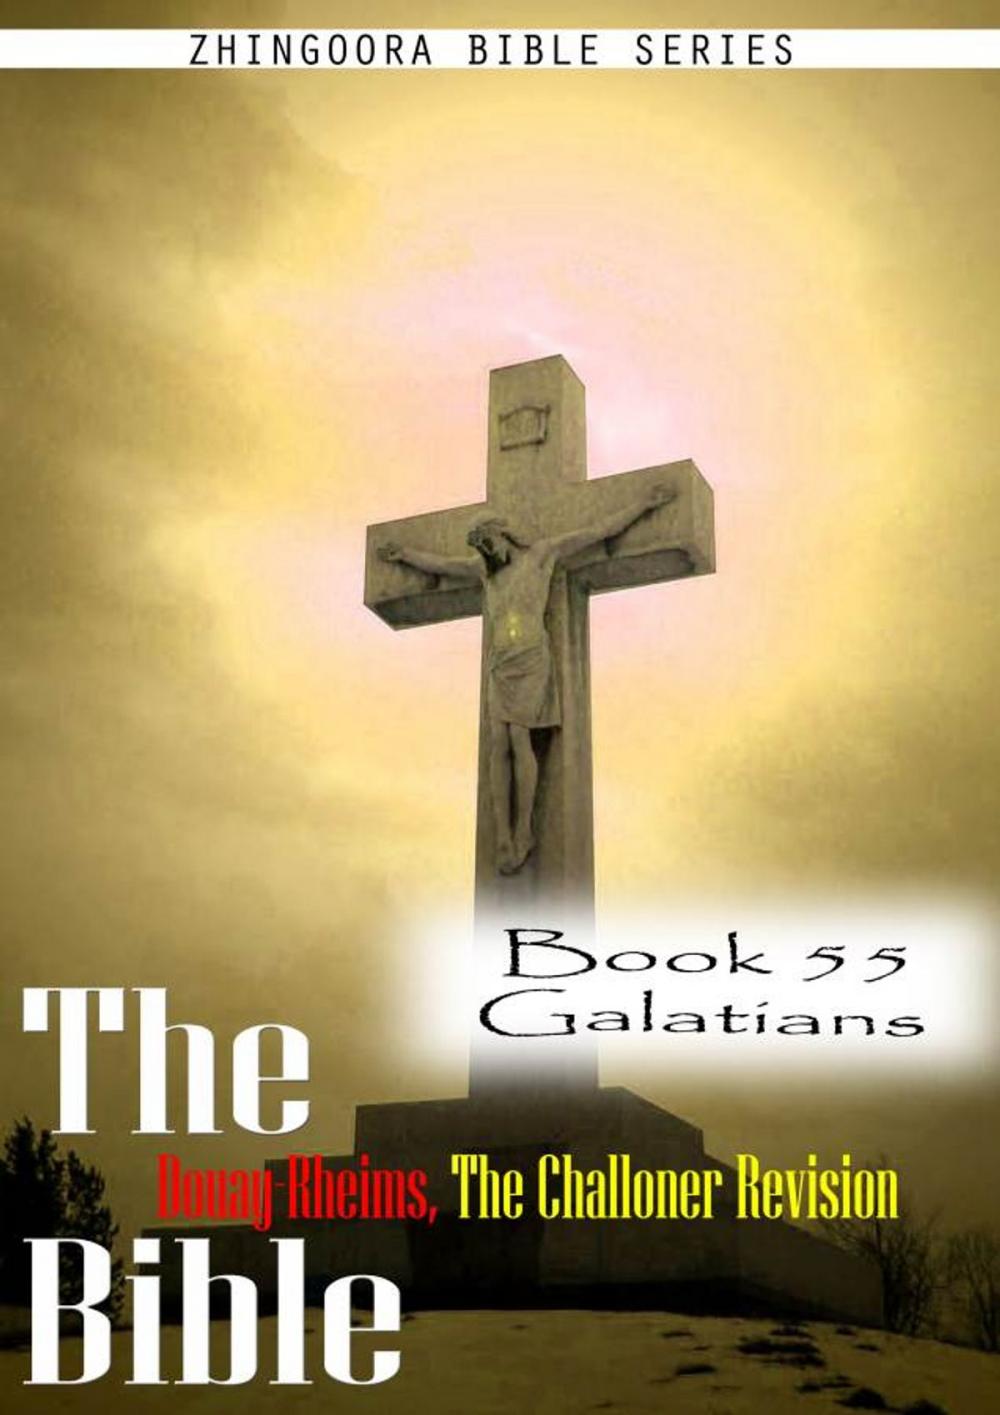 Big bigCover of The Bible Douay-Rheims, the Challoner Revision,Book 55 Galatians